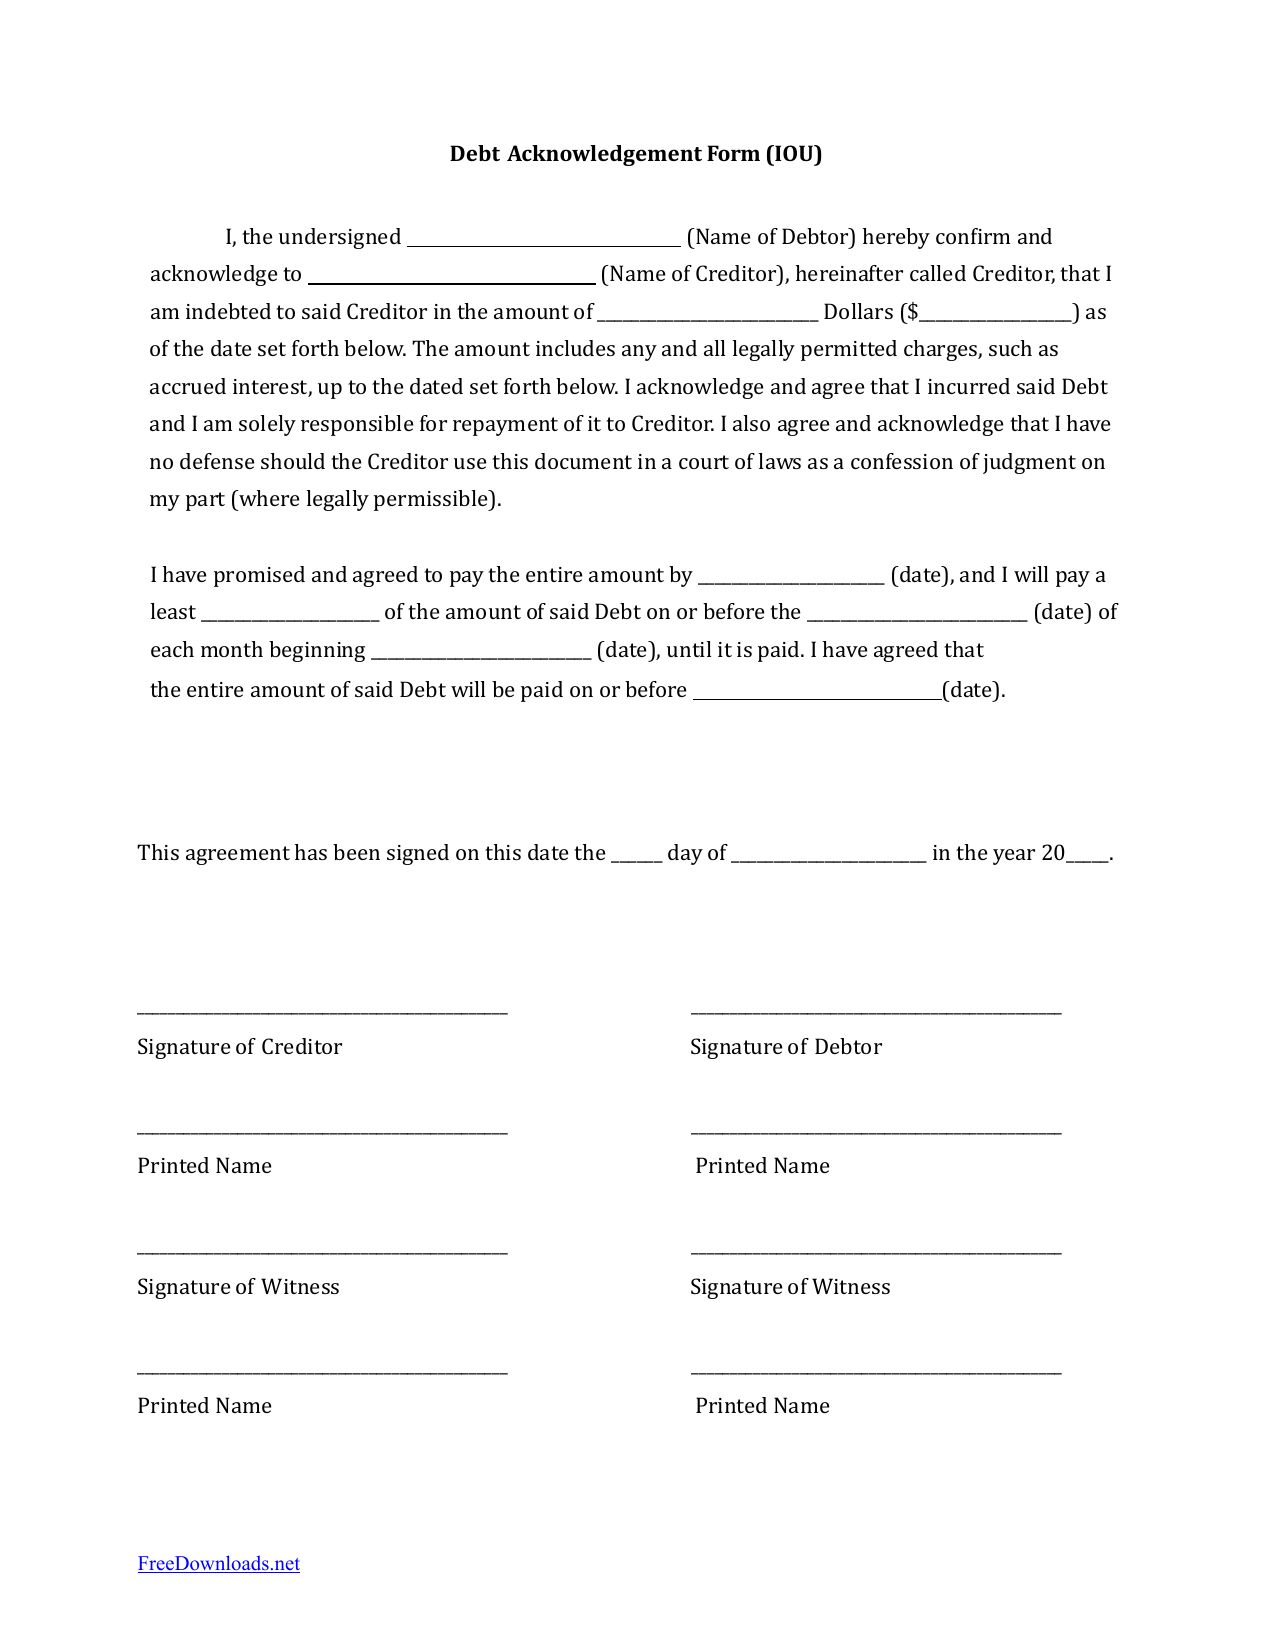 Download Iou (I Owe You) Debt Acknowledgment Form | Pdf | Rtf | Word - Free Printable Legal Documents Forms